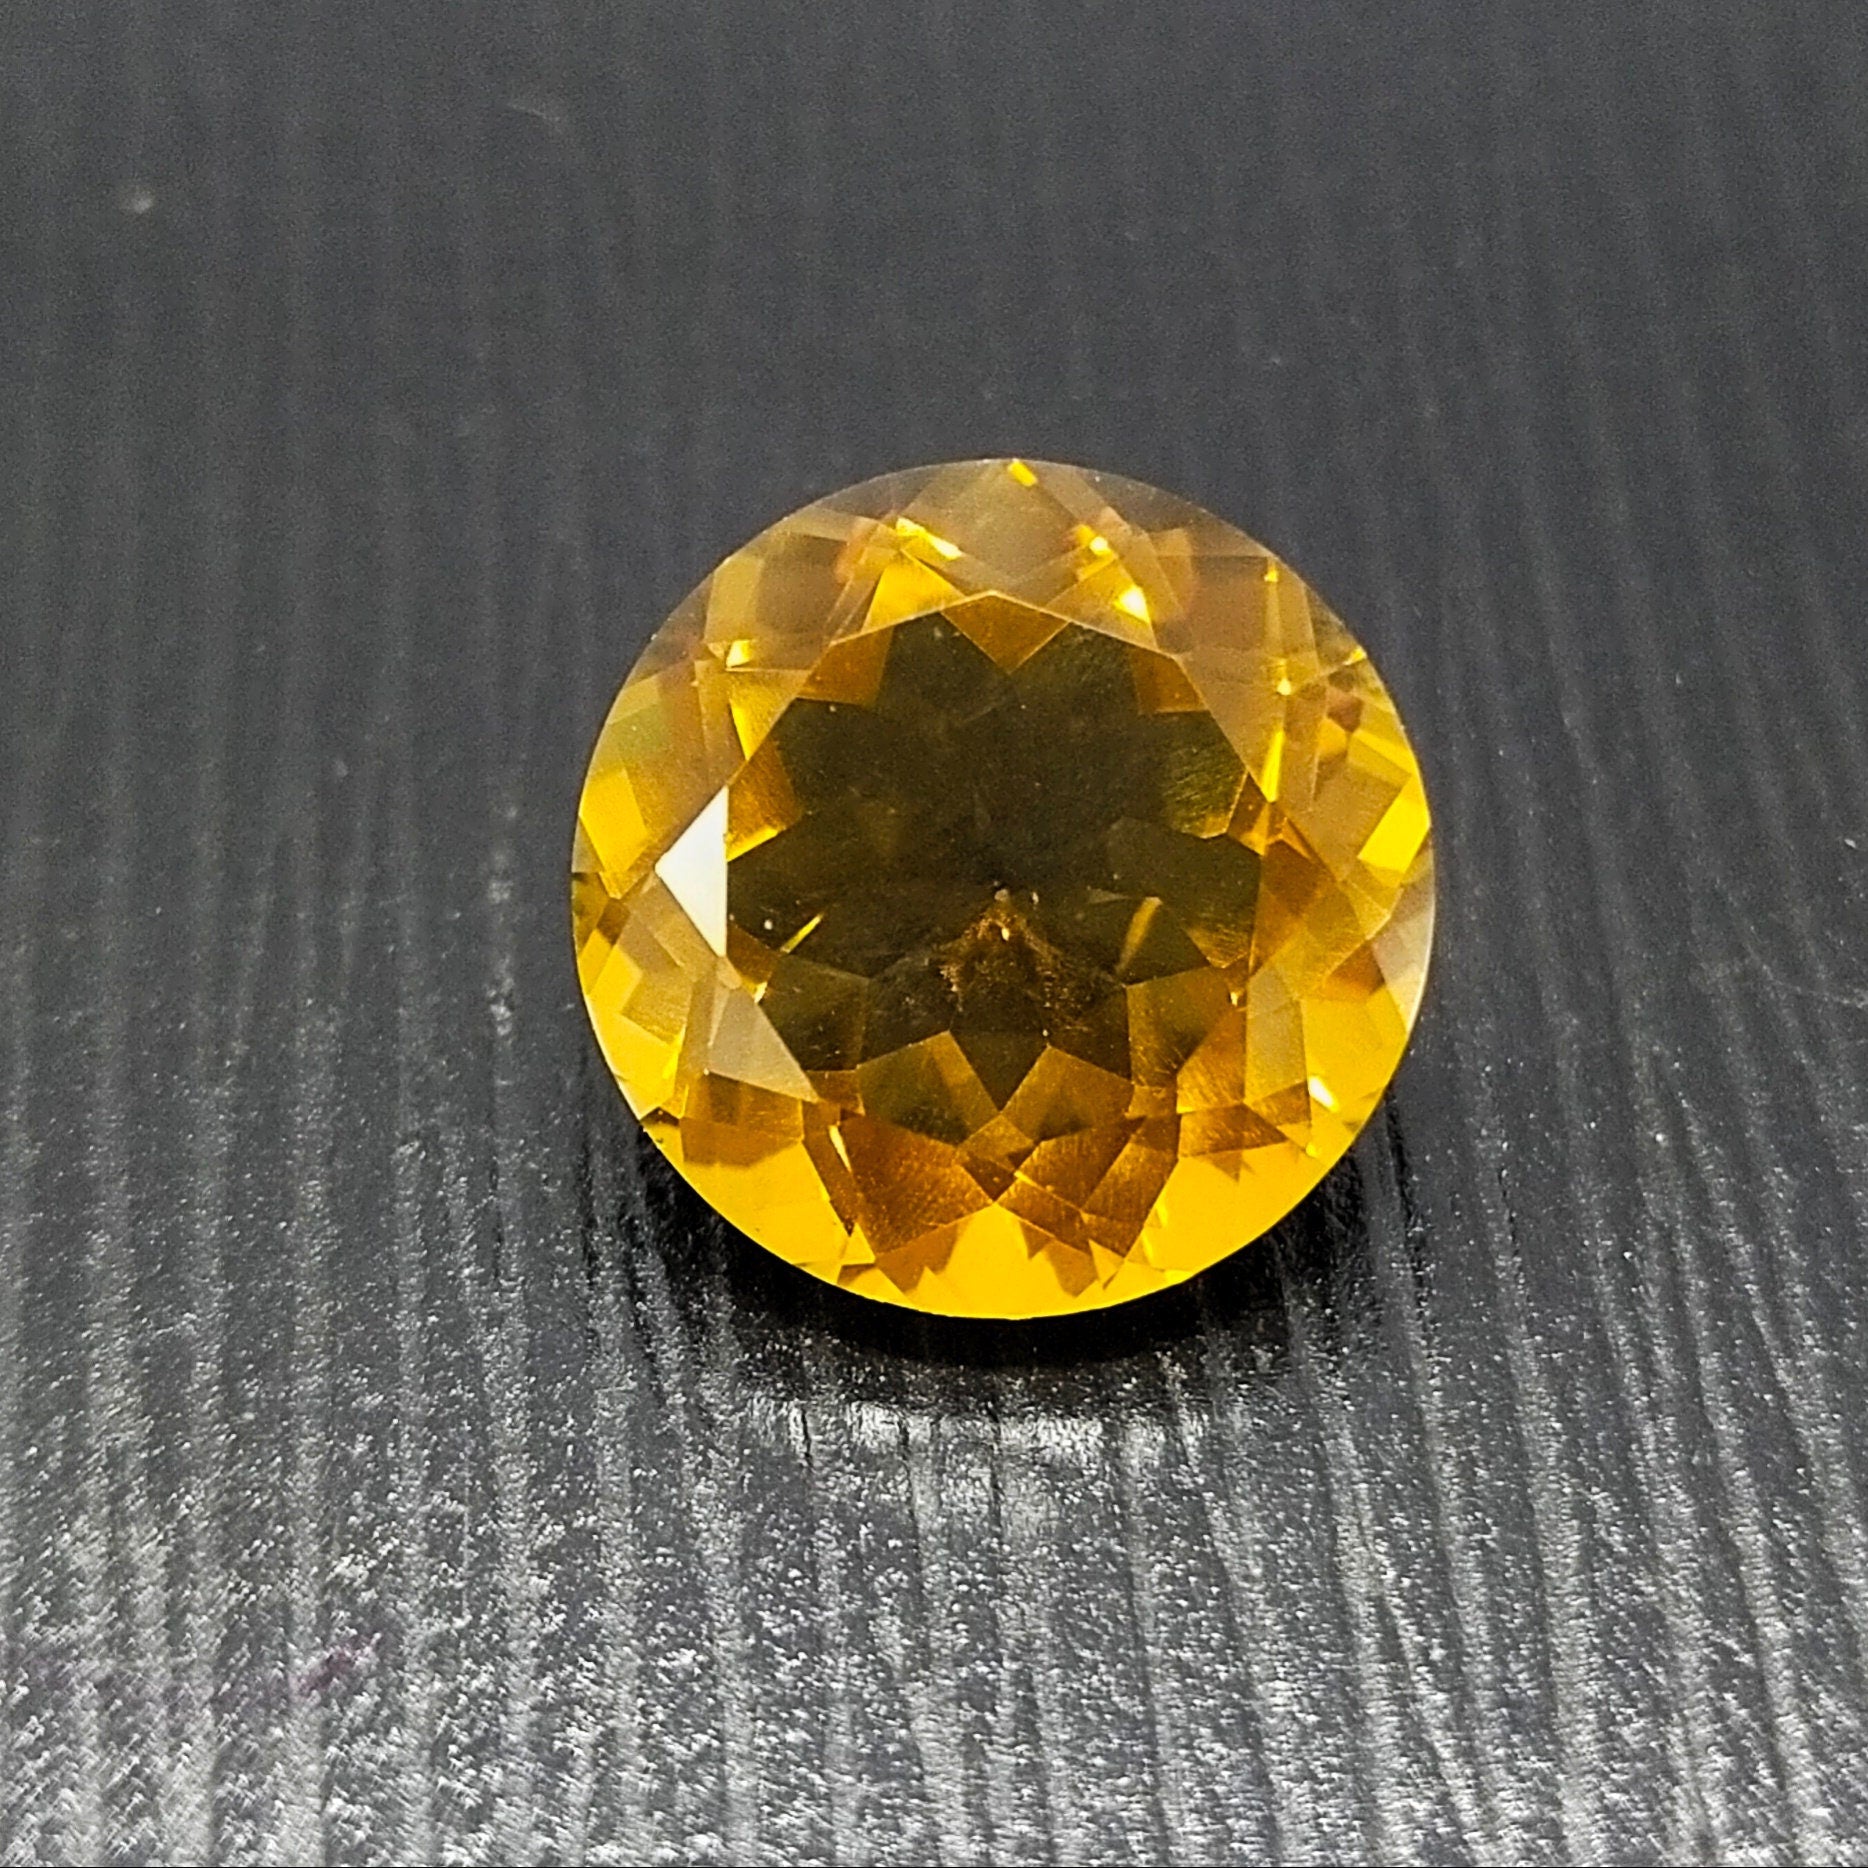 ARSAA GEMS AND MINERALSNatural round cut shape citrine gem with eye clean clarity, 9.5 carat - Premium  from ARSAA GEMS AND MINERALS - Just $30.00! Shop now at ARSAA GEMS AND MINERALS